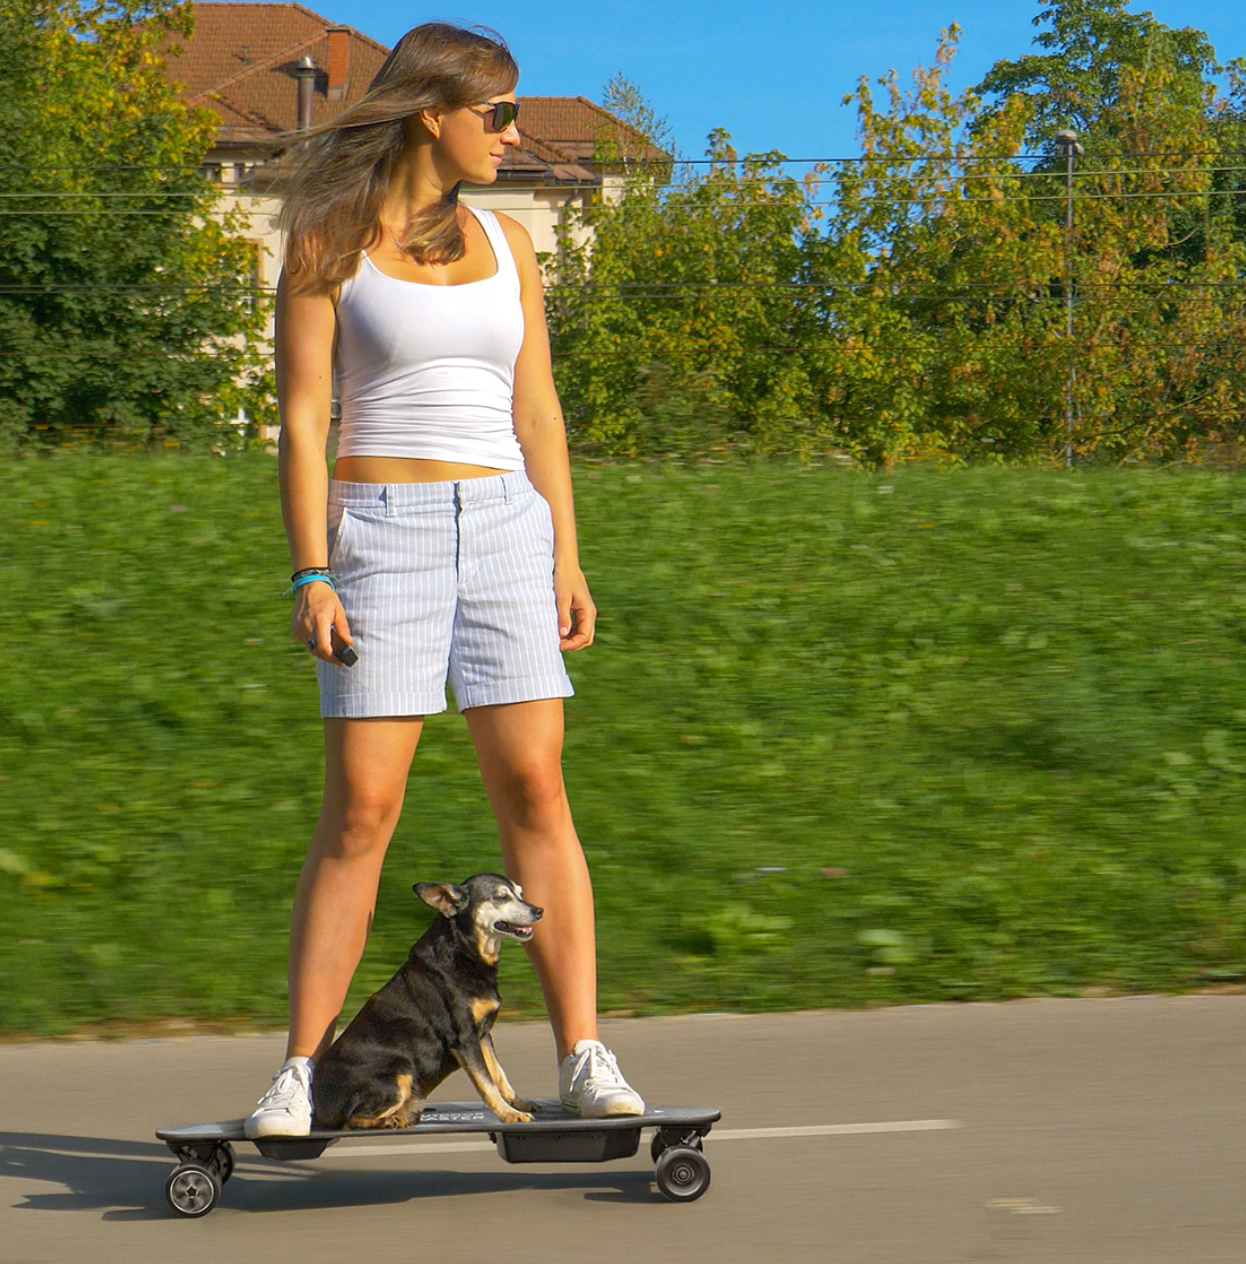 Model is on a longboard with their dog in the middle of the board as well while cruising down the road